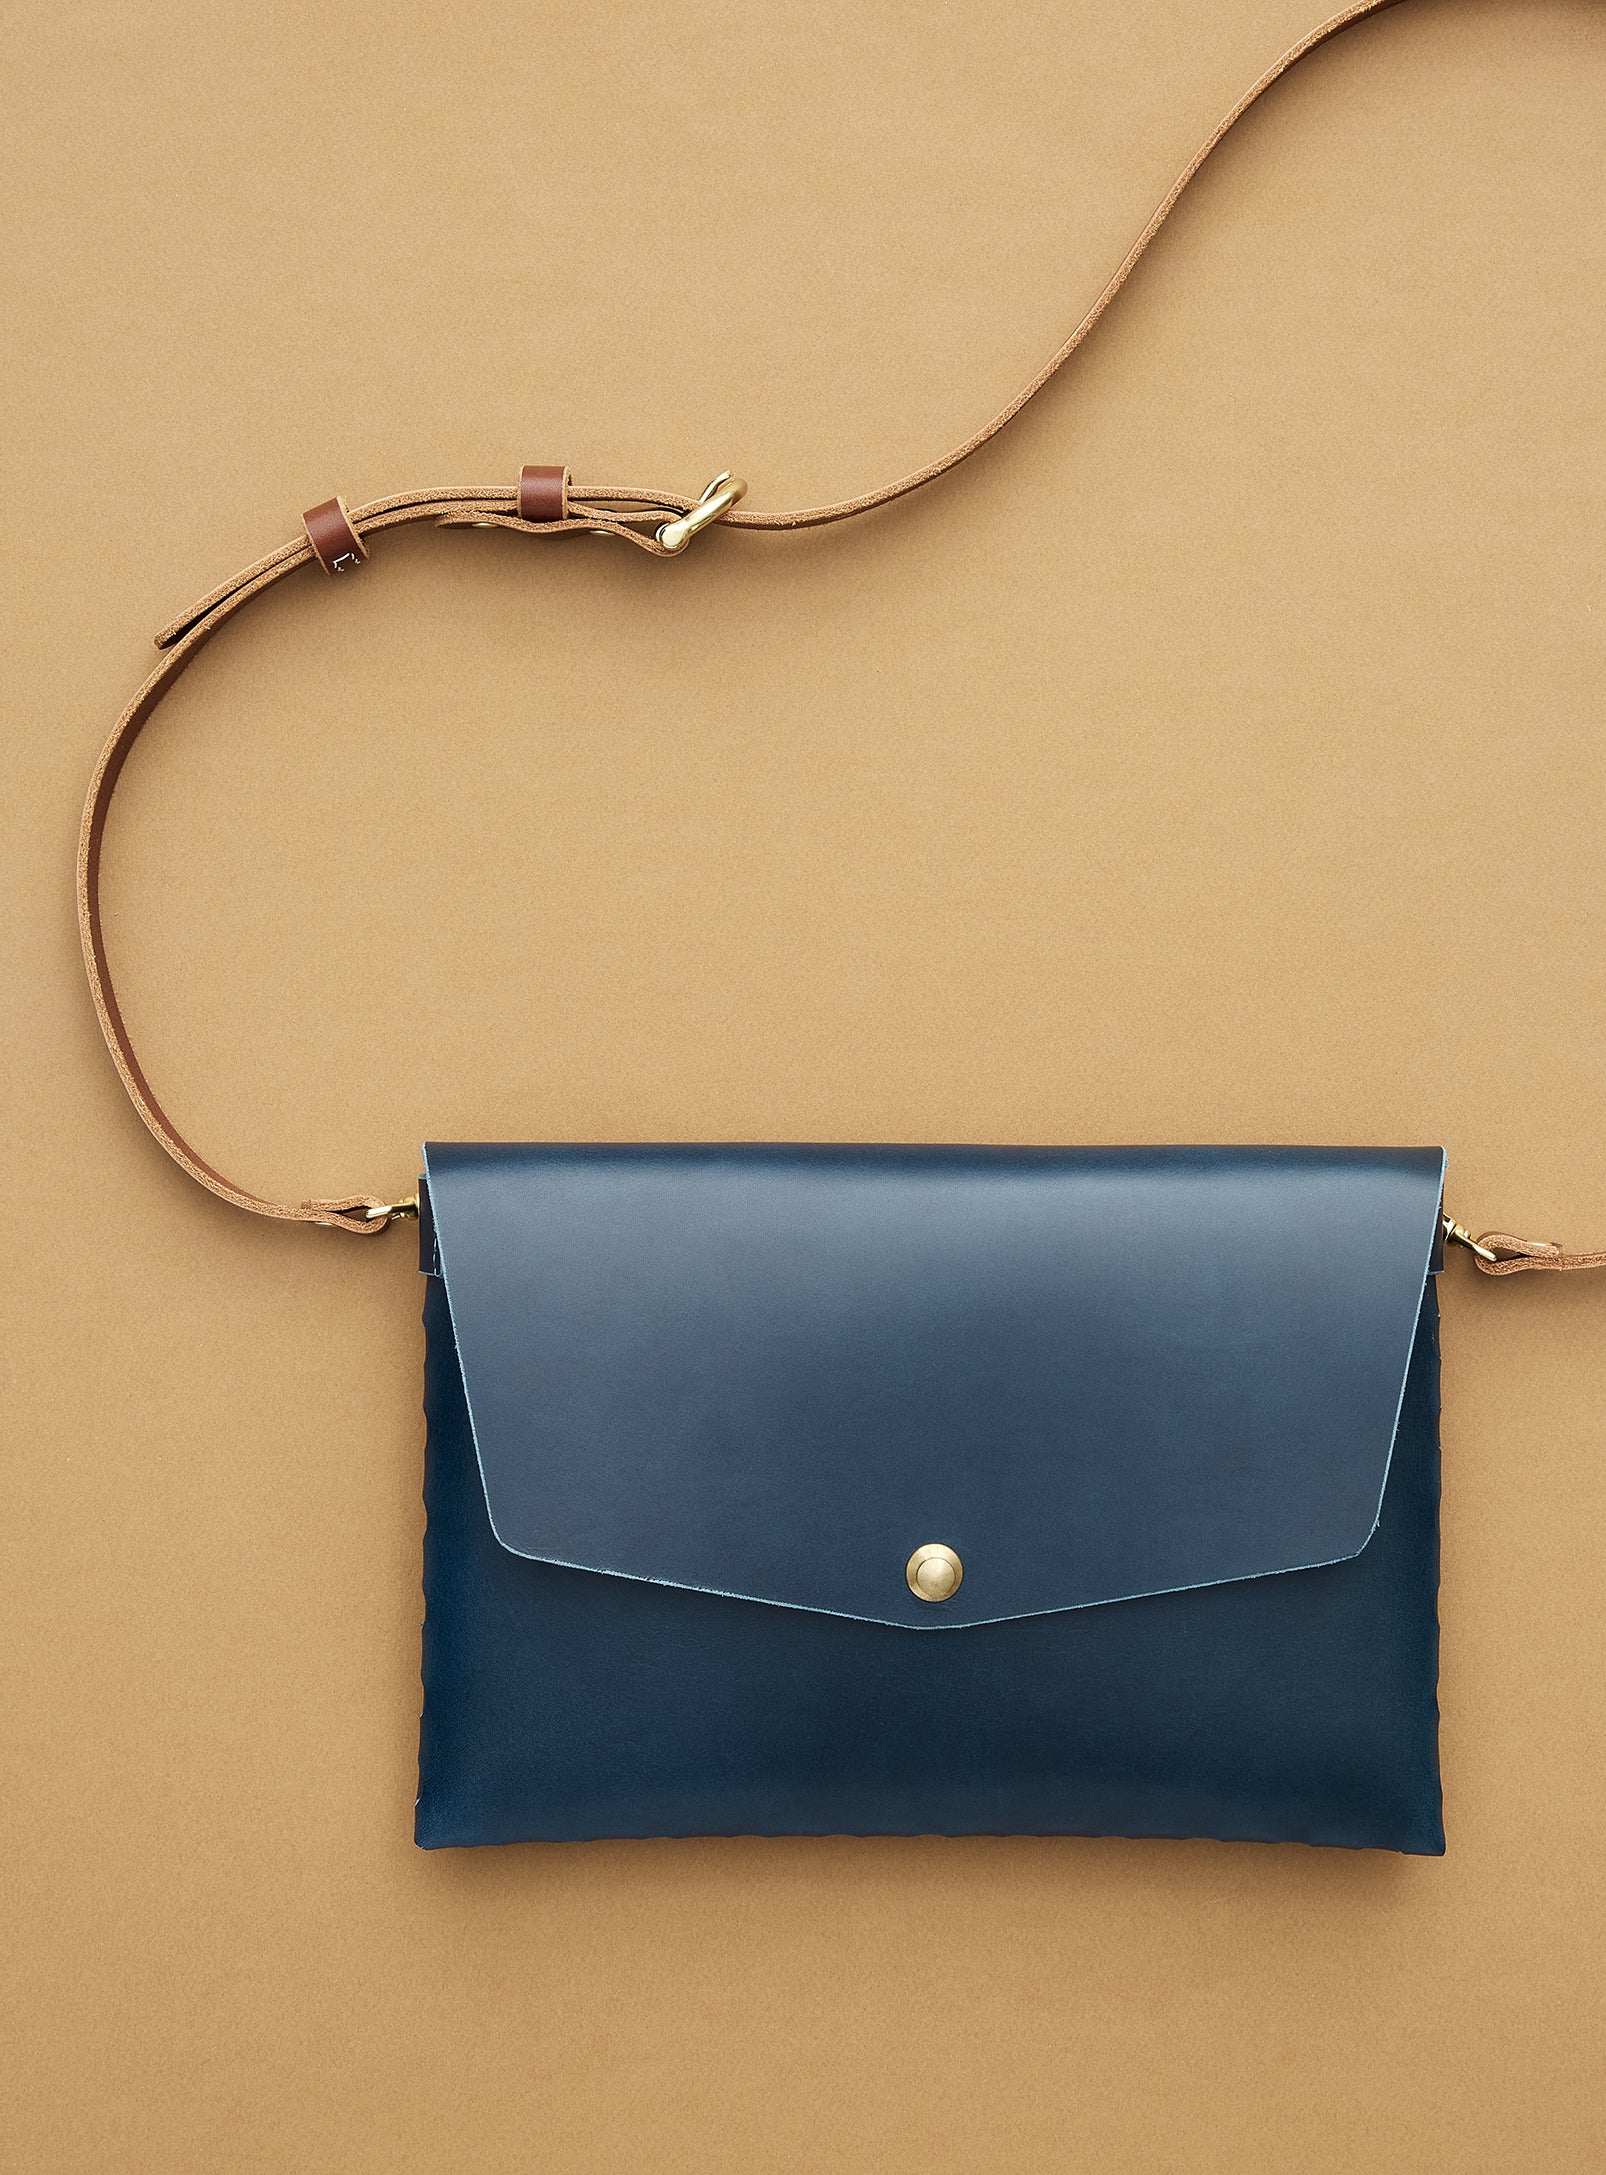 modjūl’s leather mini bag deluxe bag in blue. A larger take on the classic mini bag, a rectangular-shaped bag with long detachable straps, handcrafted in Canada using quality Italian leather and brass hardware.